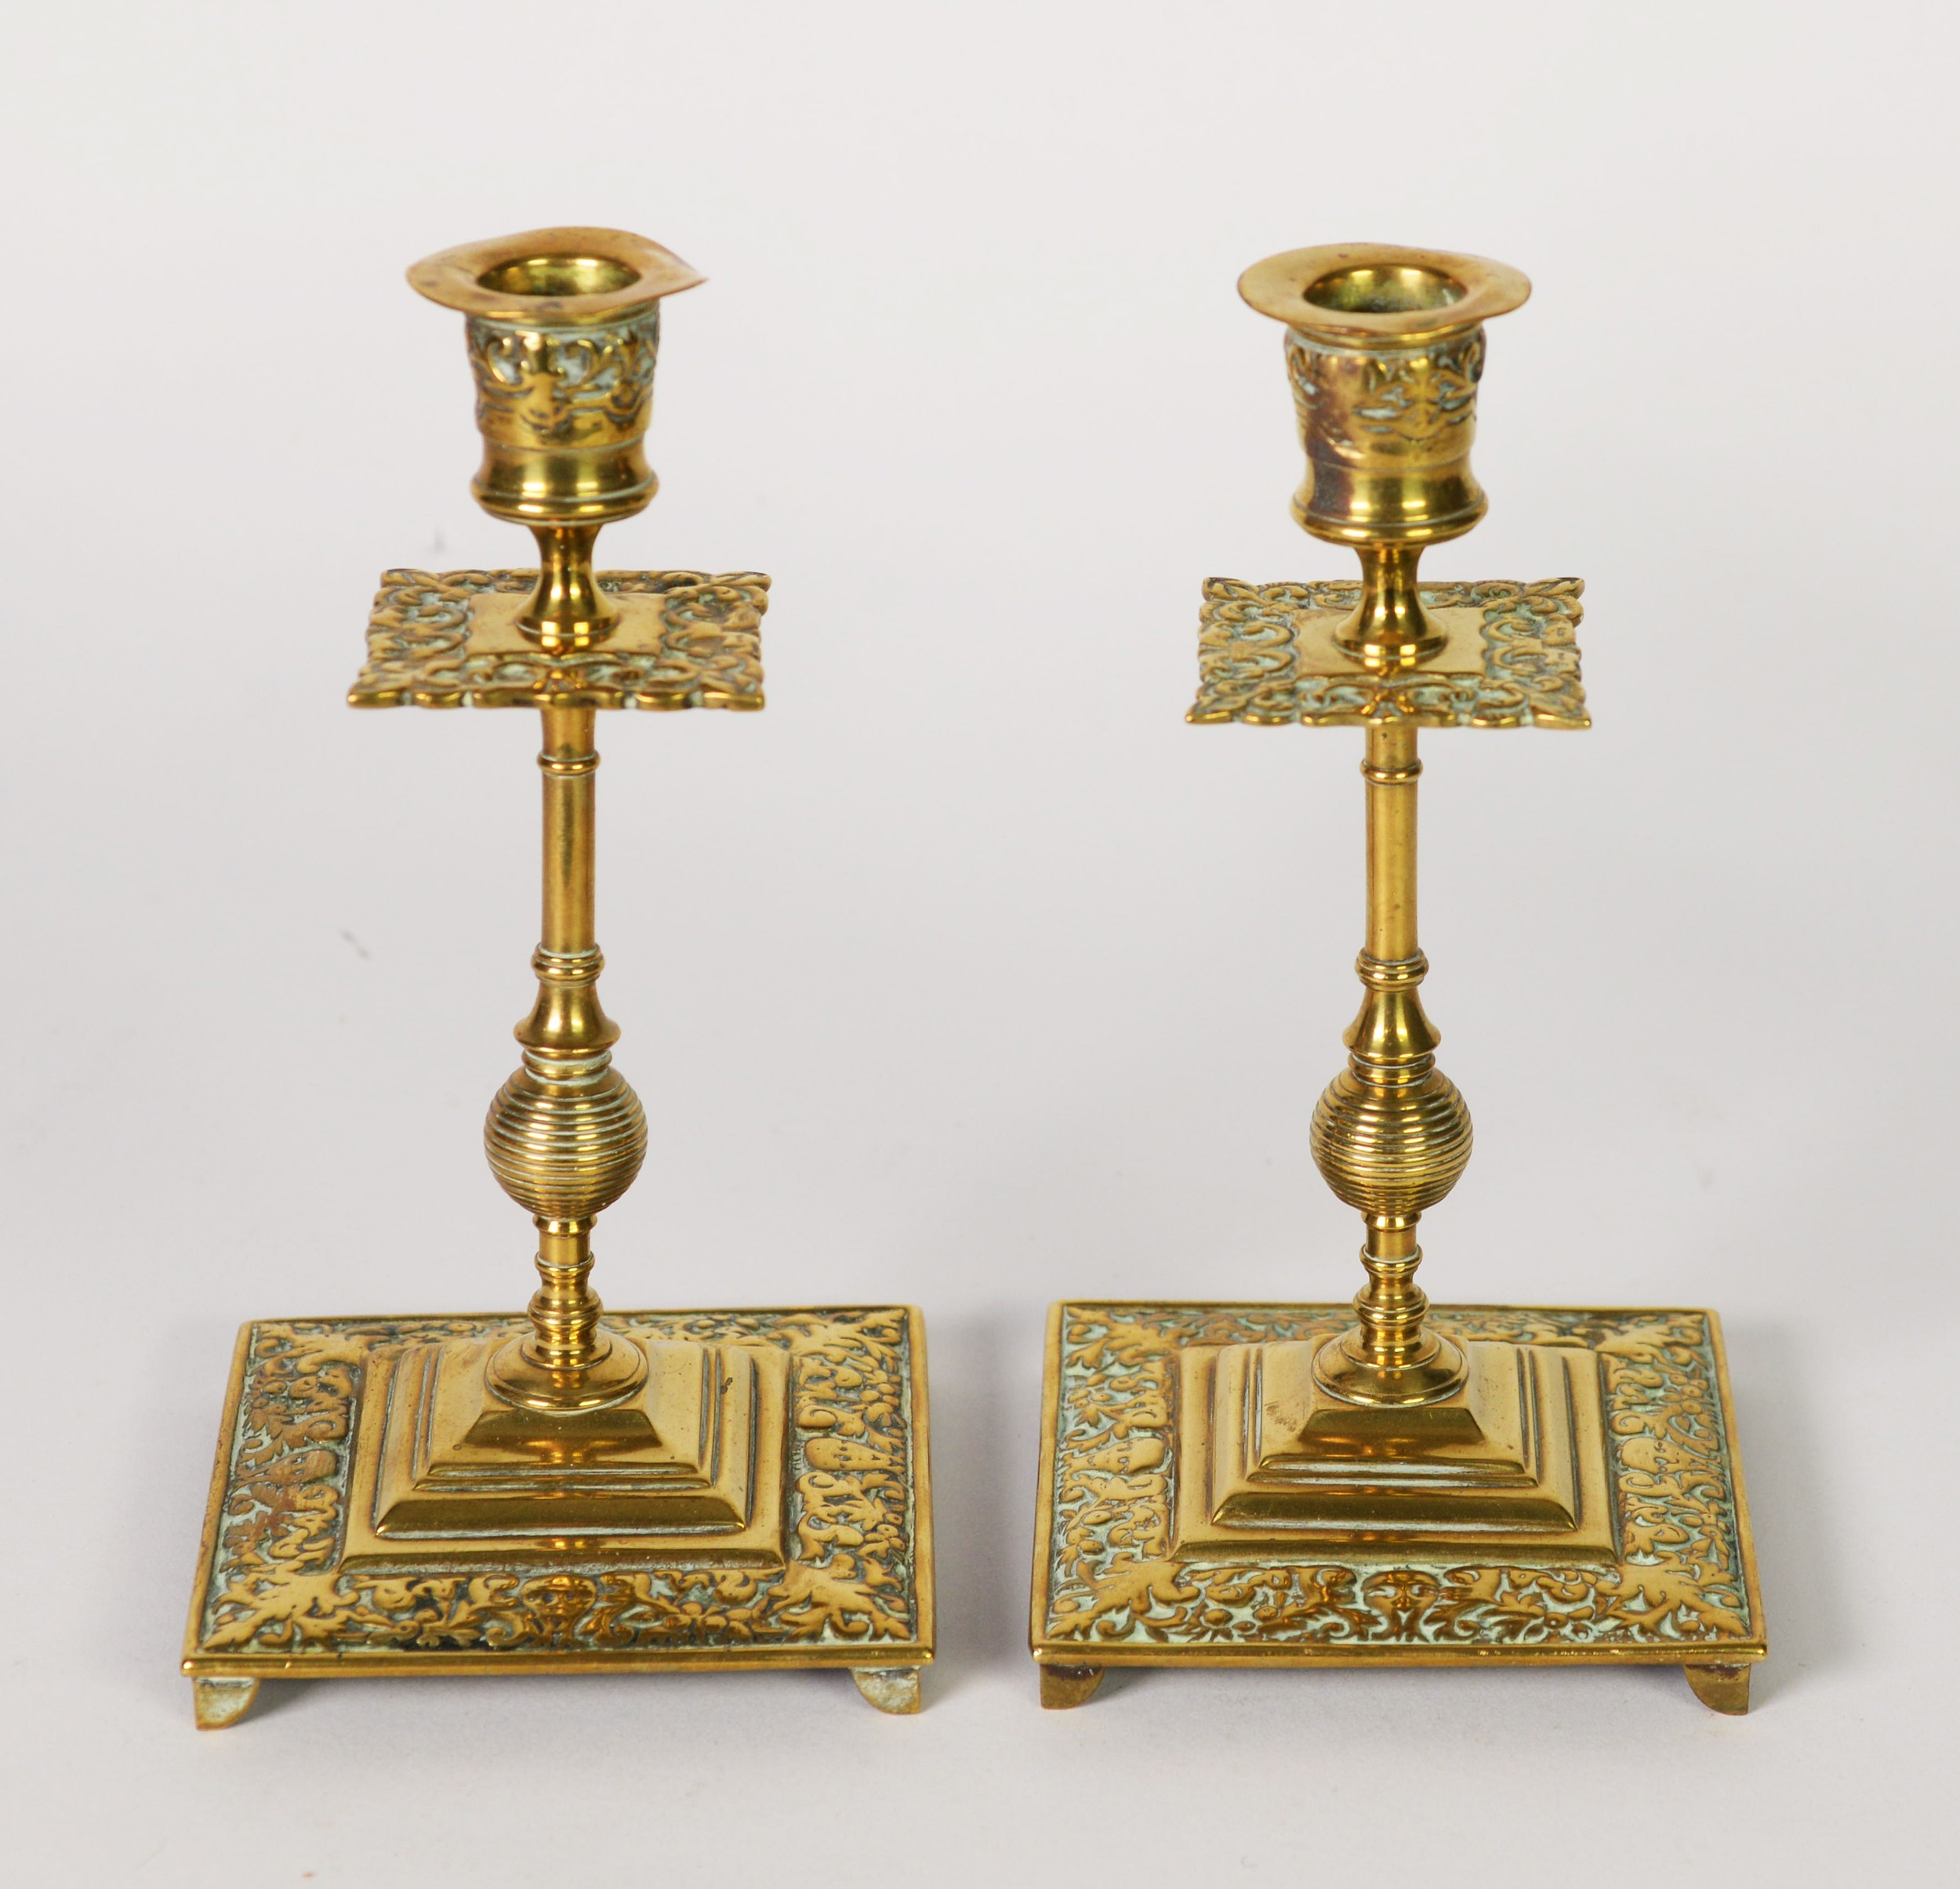 PAIR OF LATE 19th CENTURY ARTS & CRAFTS DESIGN BRASS CANDLESTICKS, with foliate scroll decoration to